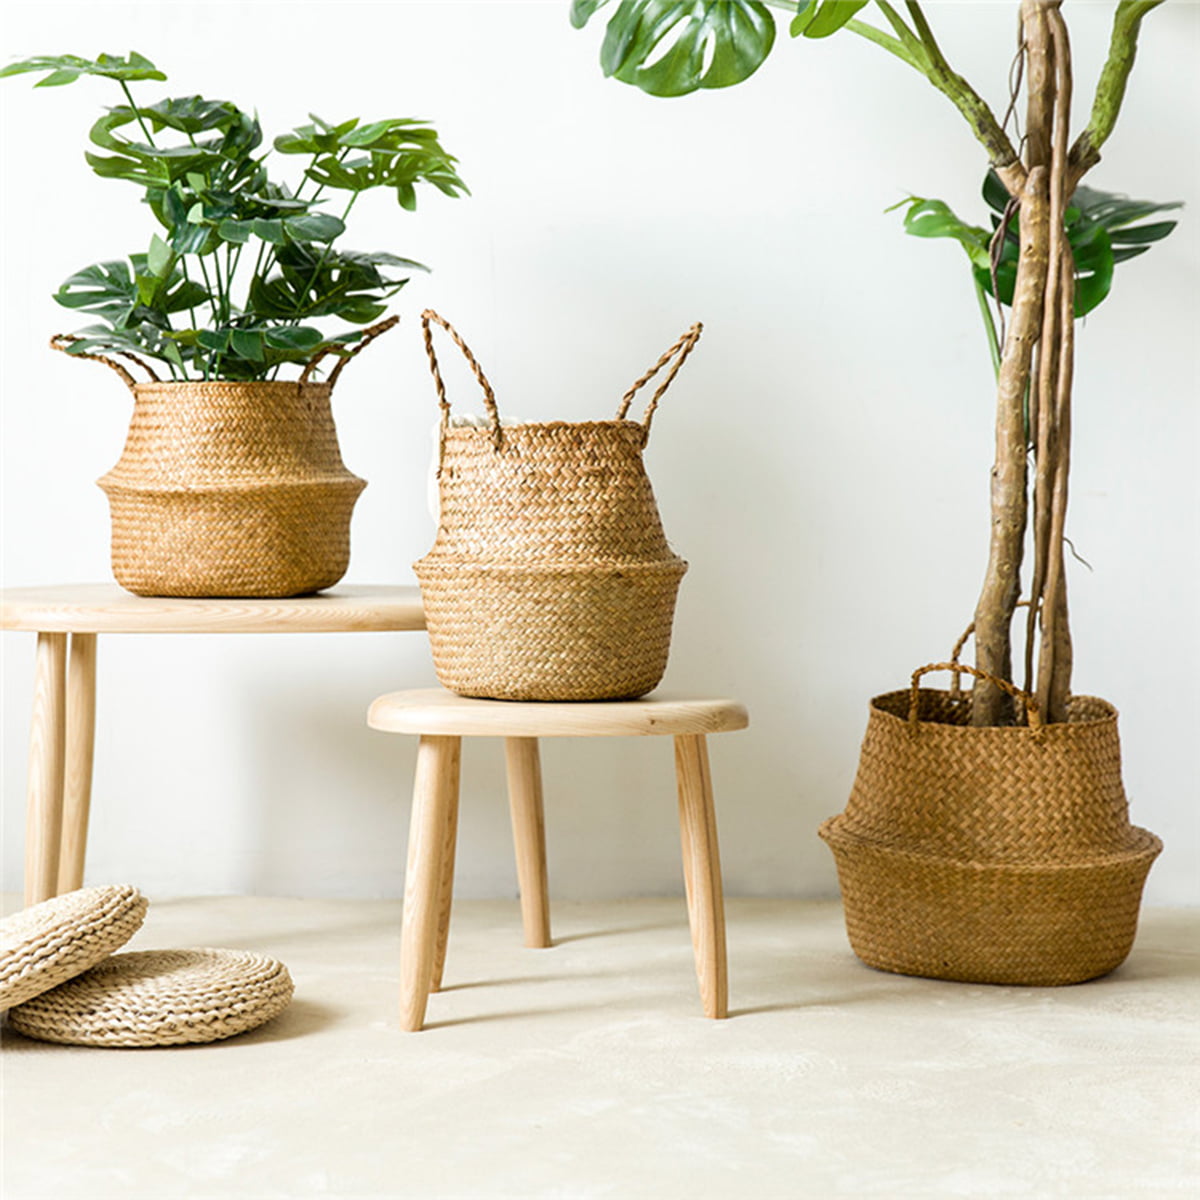 and Grocery and Toy Storage丨Plant Basket Decorative for Living Room & Laundry Room Plant Pot Cover Picnic Foldable Woven Seagrass Belly Basket for Storage Laundry Bathroom & Bedroom 